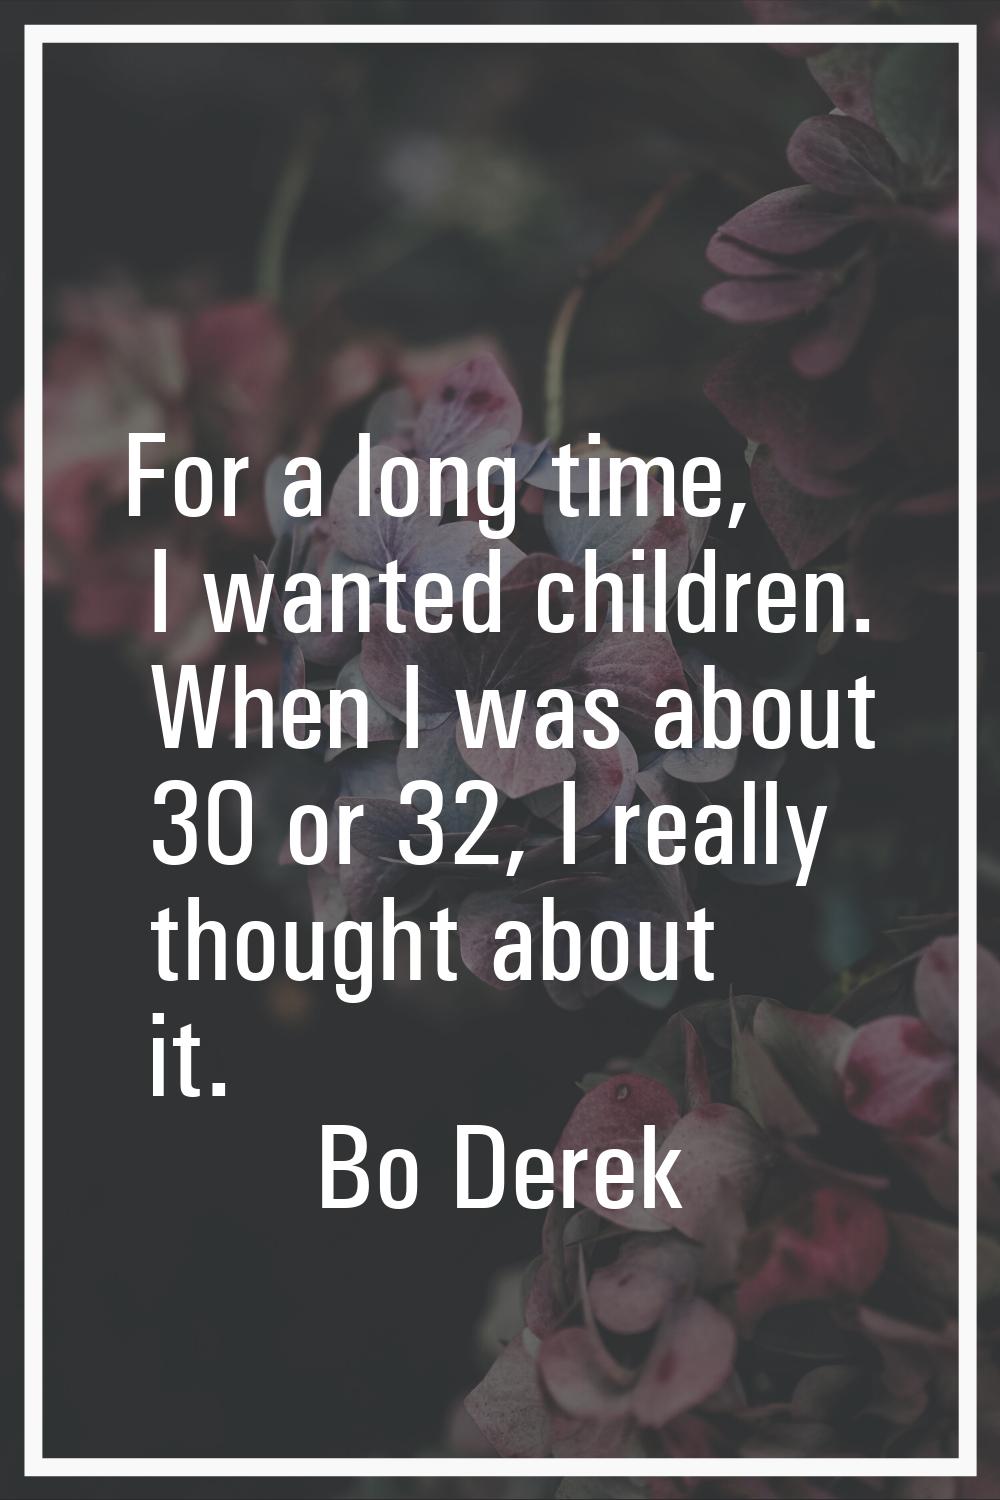 For a long time, I wanted children. When I was about 30 or 32, I really thought about it.